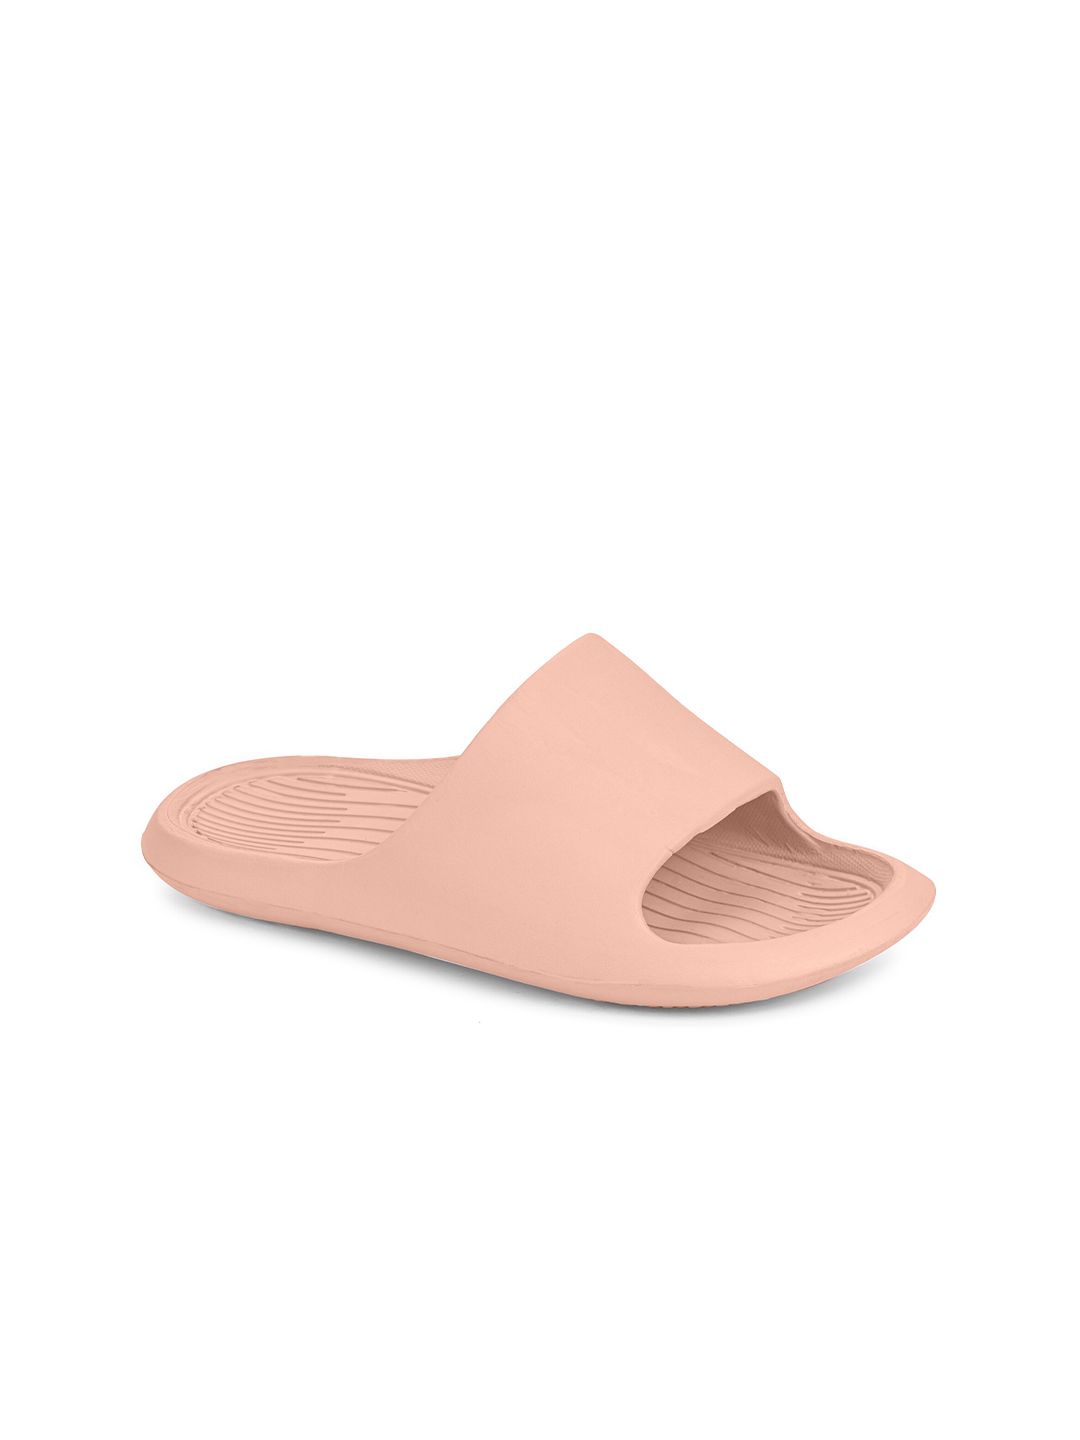 REFOAM Women Pink Rubber Sliders Price in India